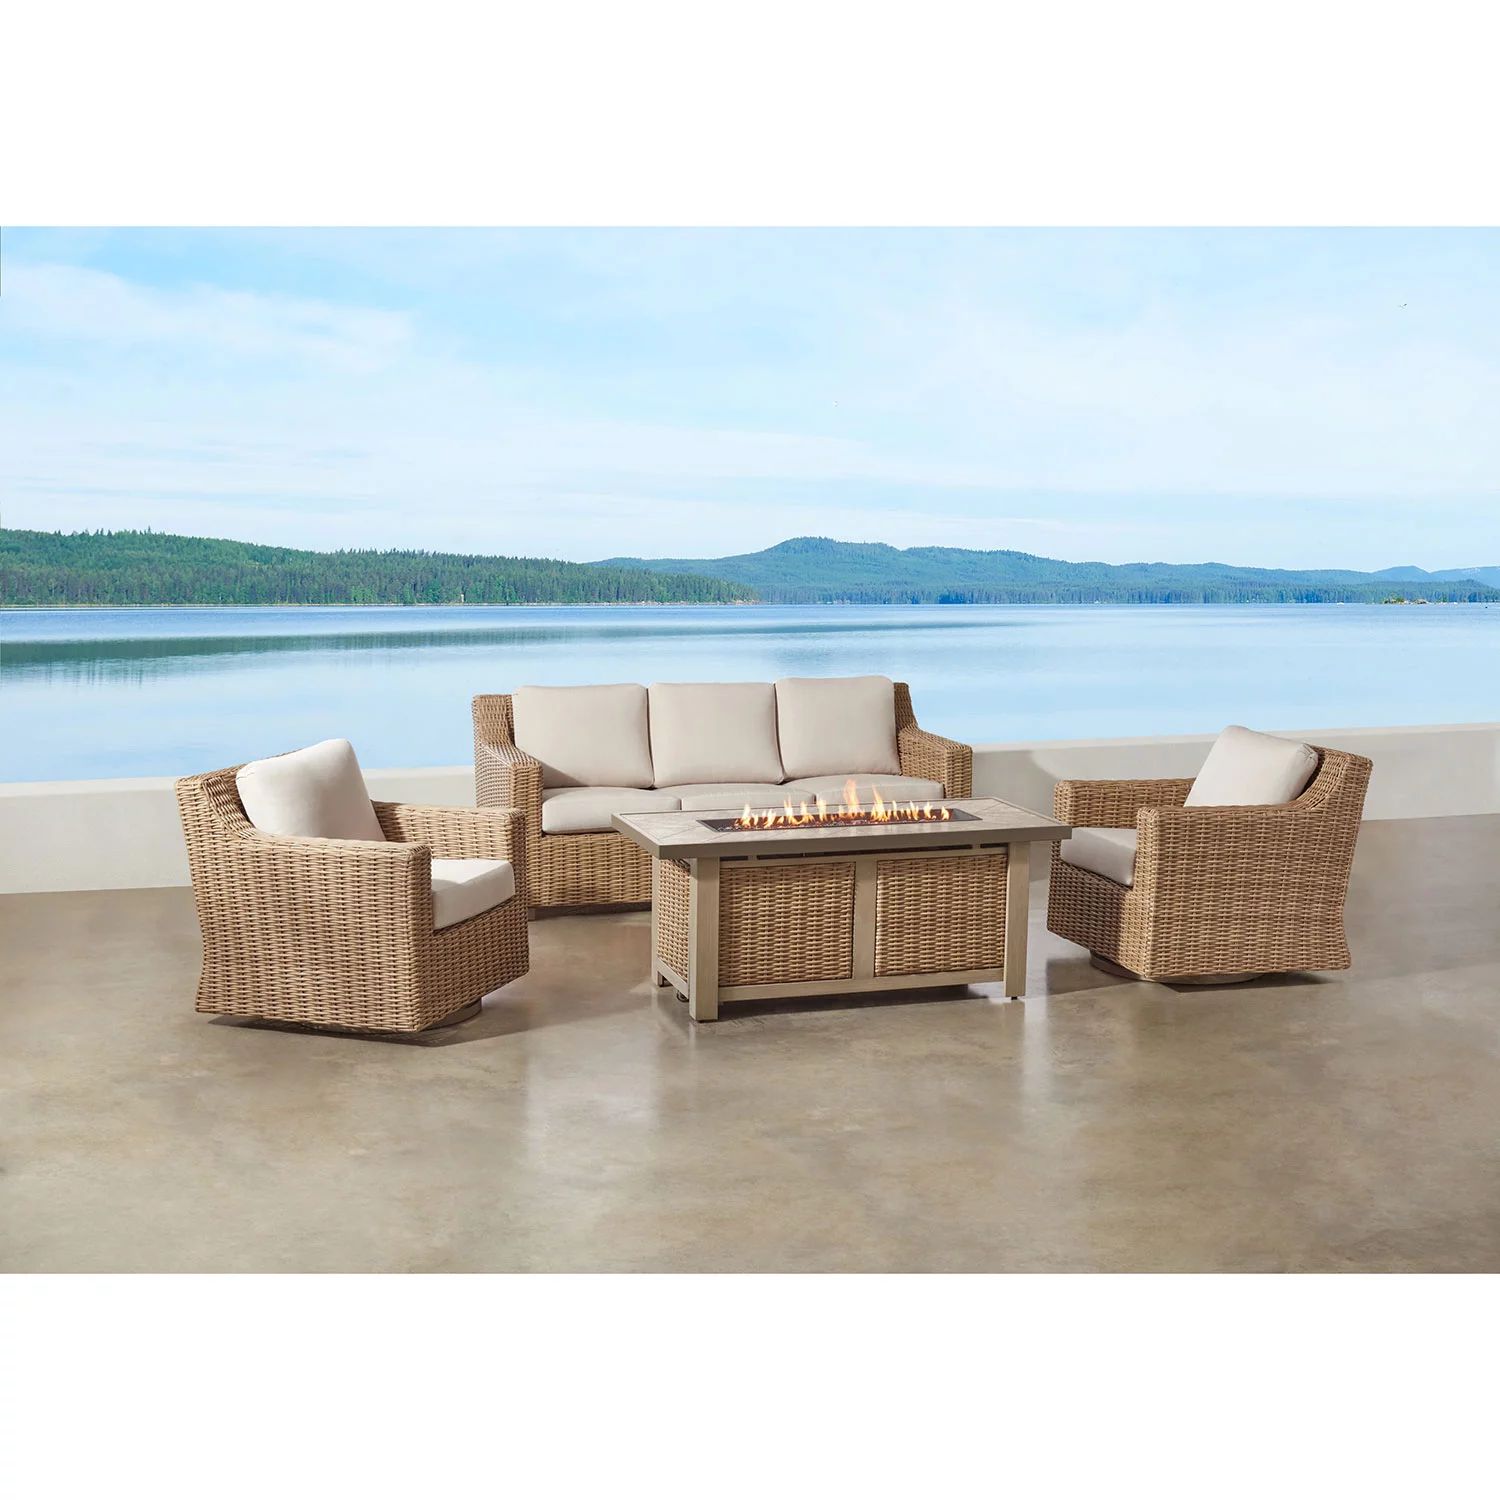 Member's Mark Breck 4-Piece Deep Seating Set with Fire Pit | Sam's Club